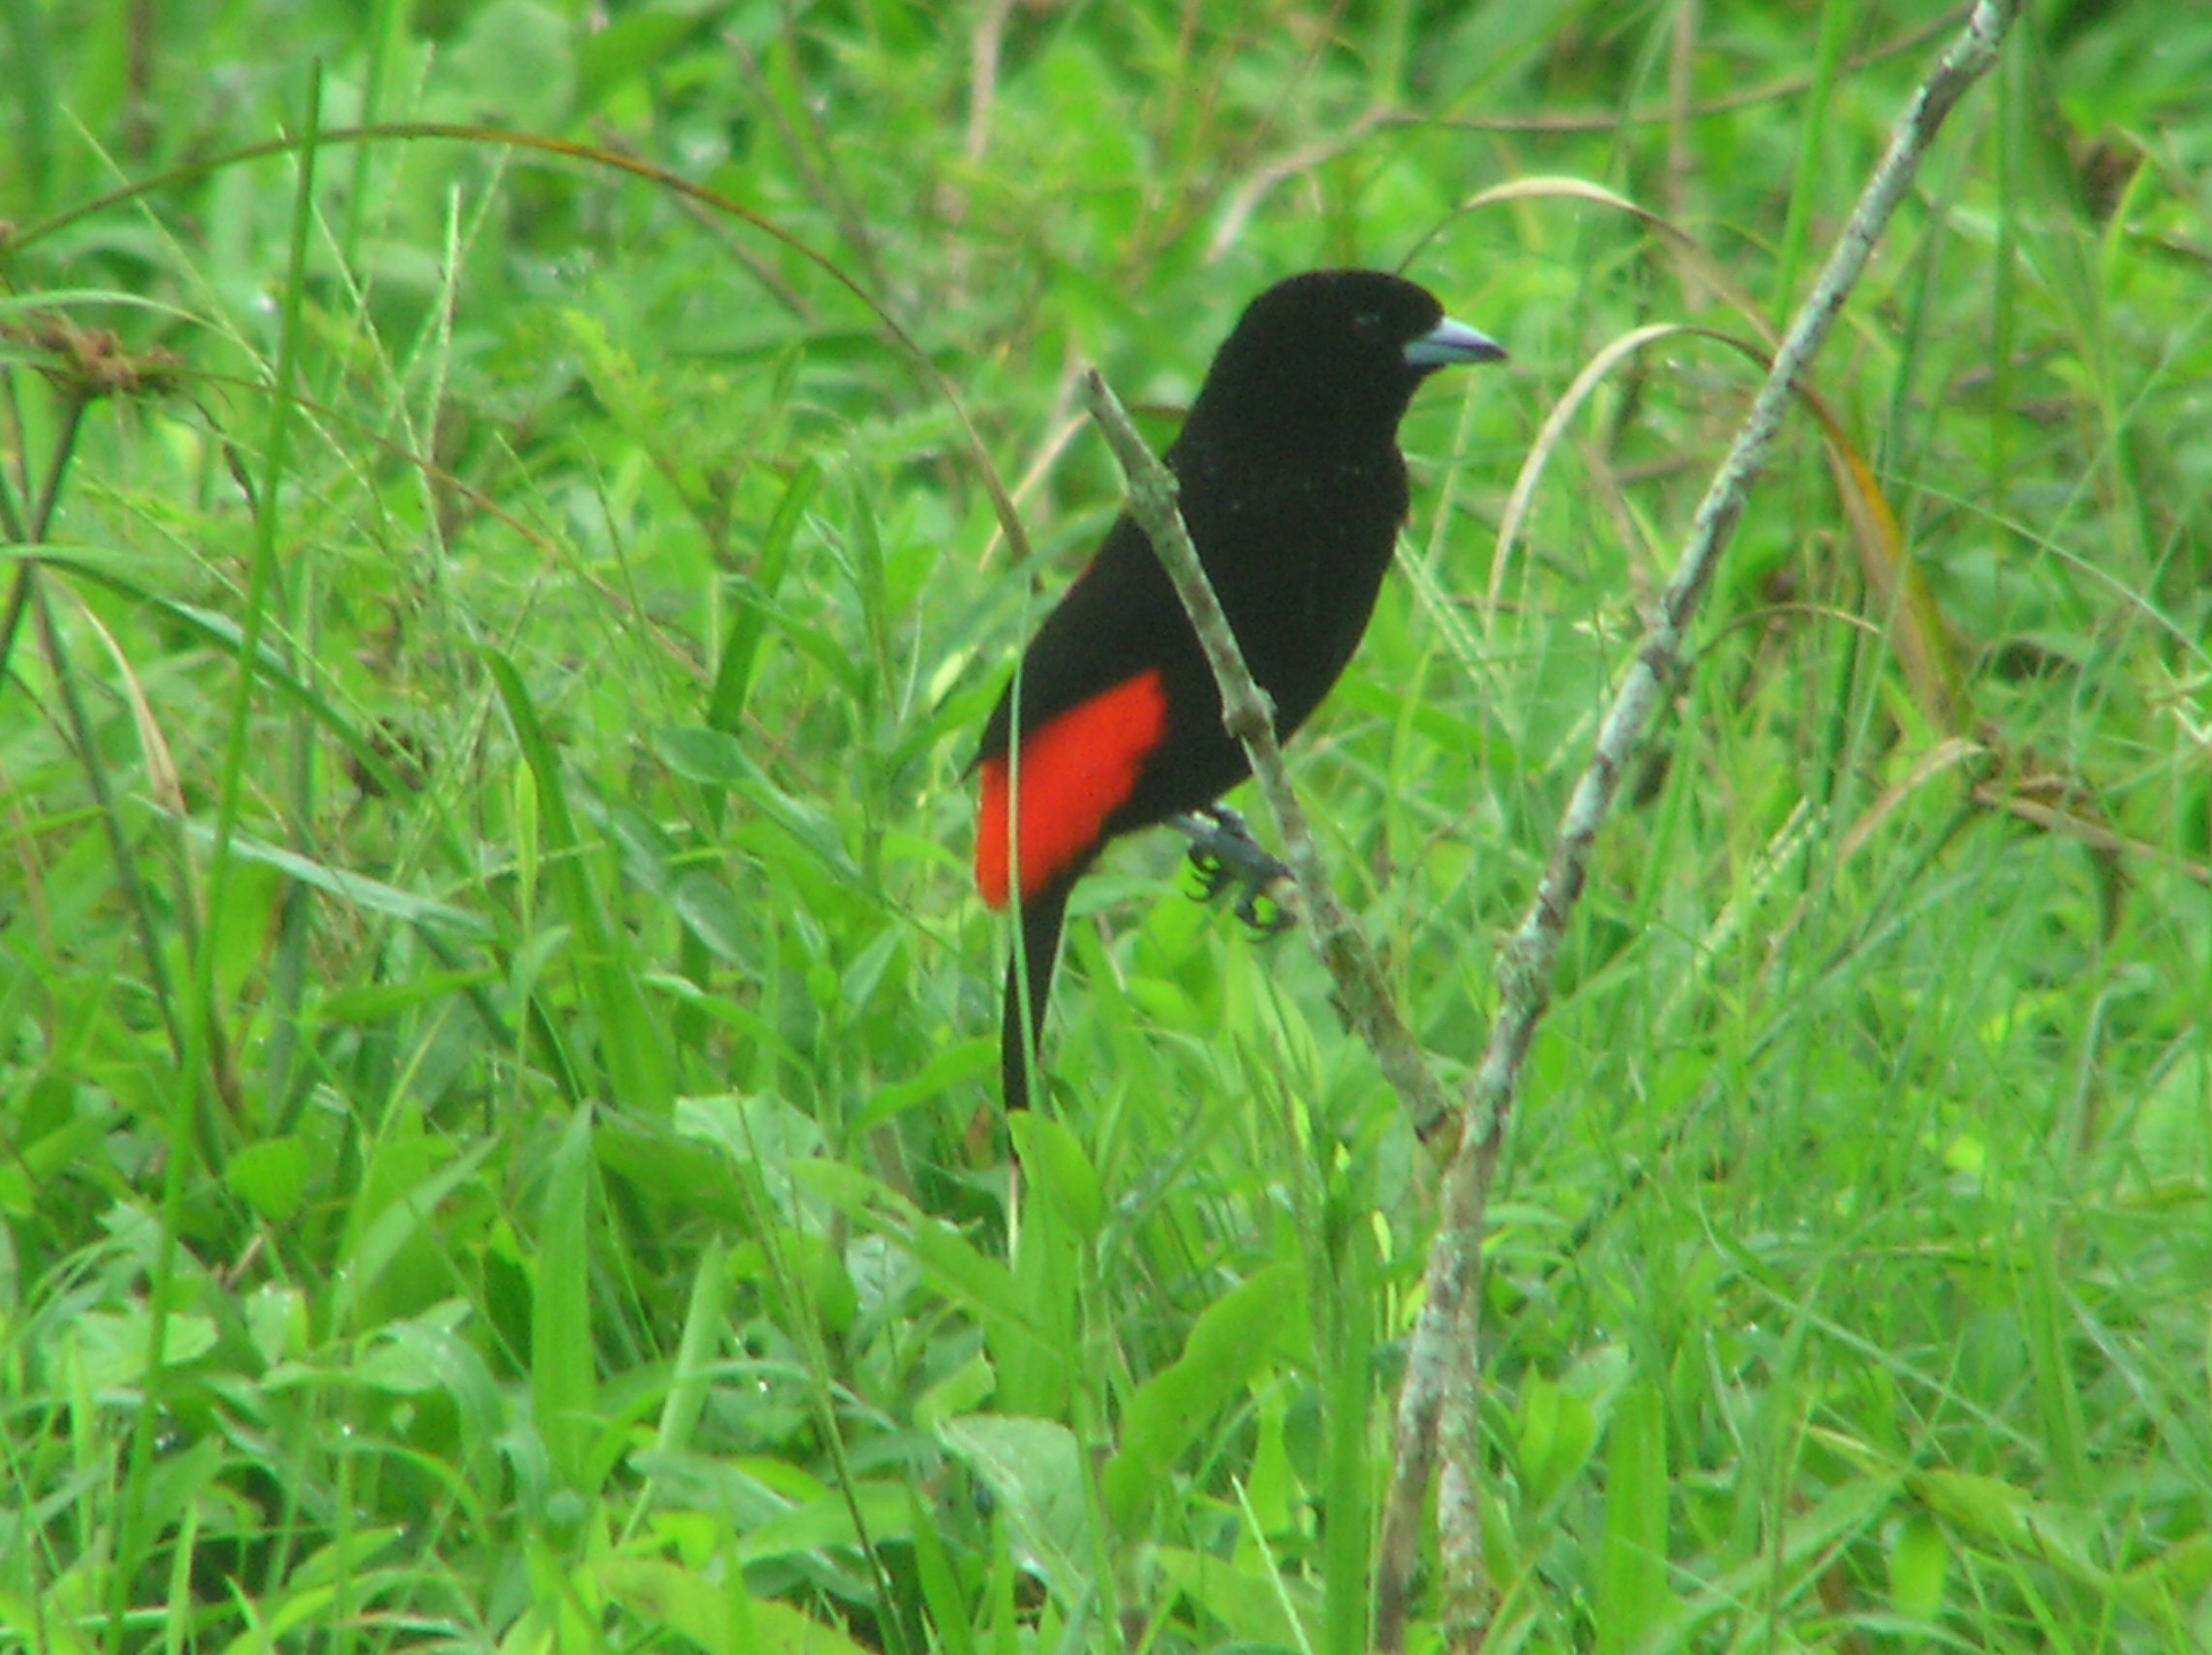 Click picture to see more Passerini's Tanager photos.